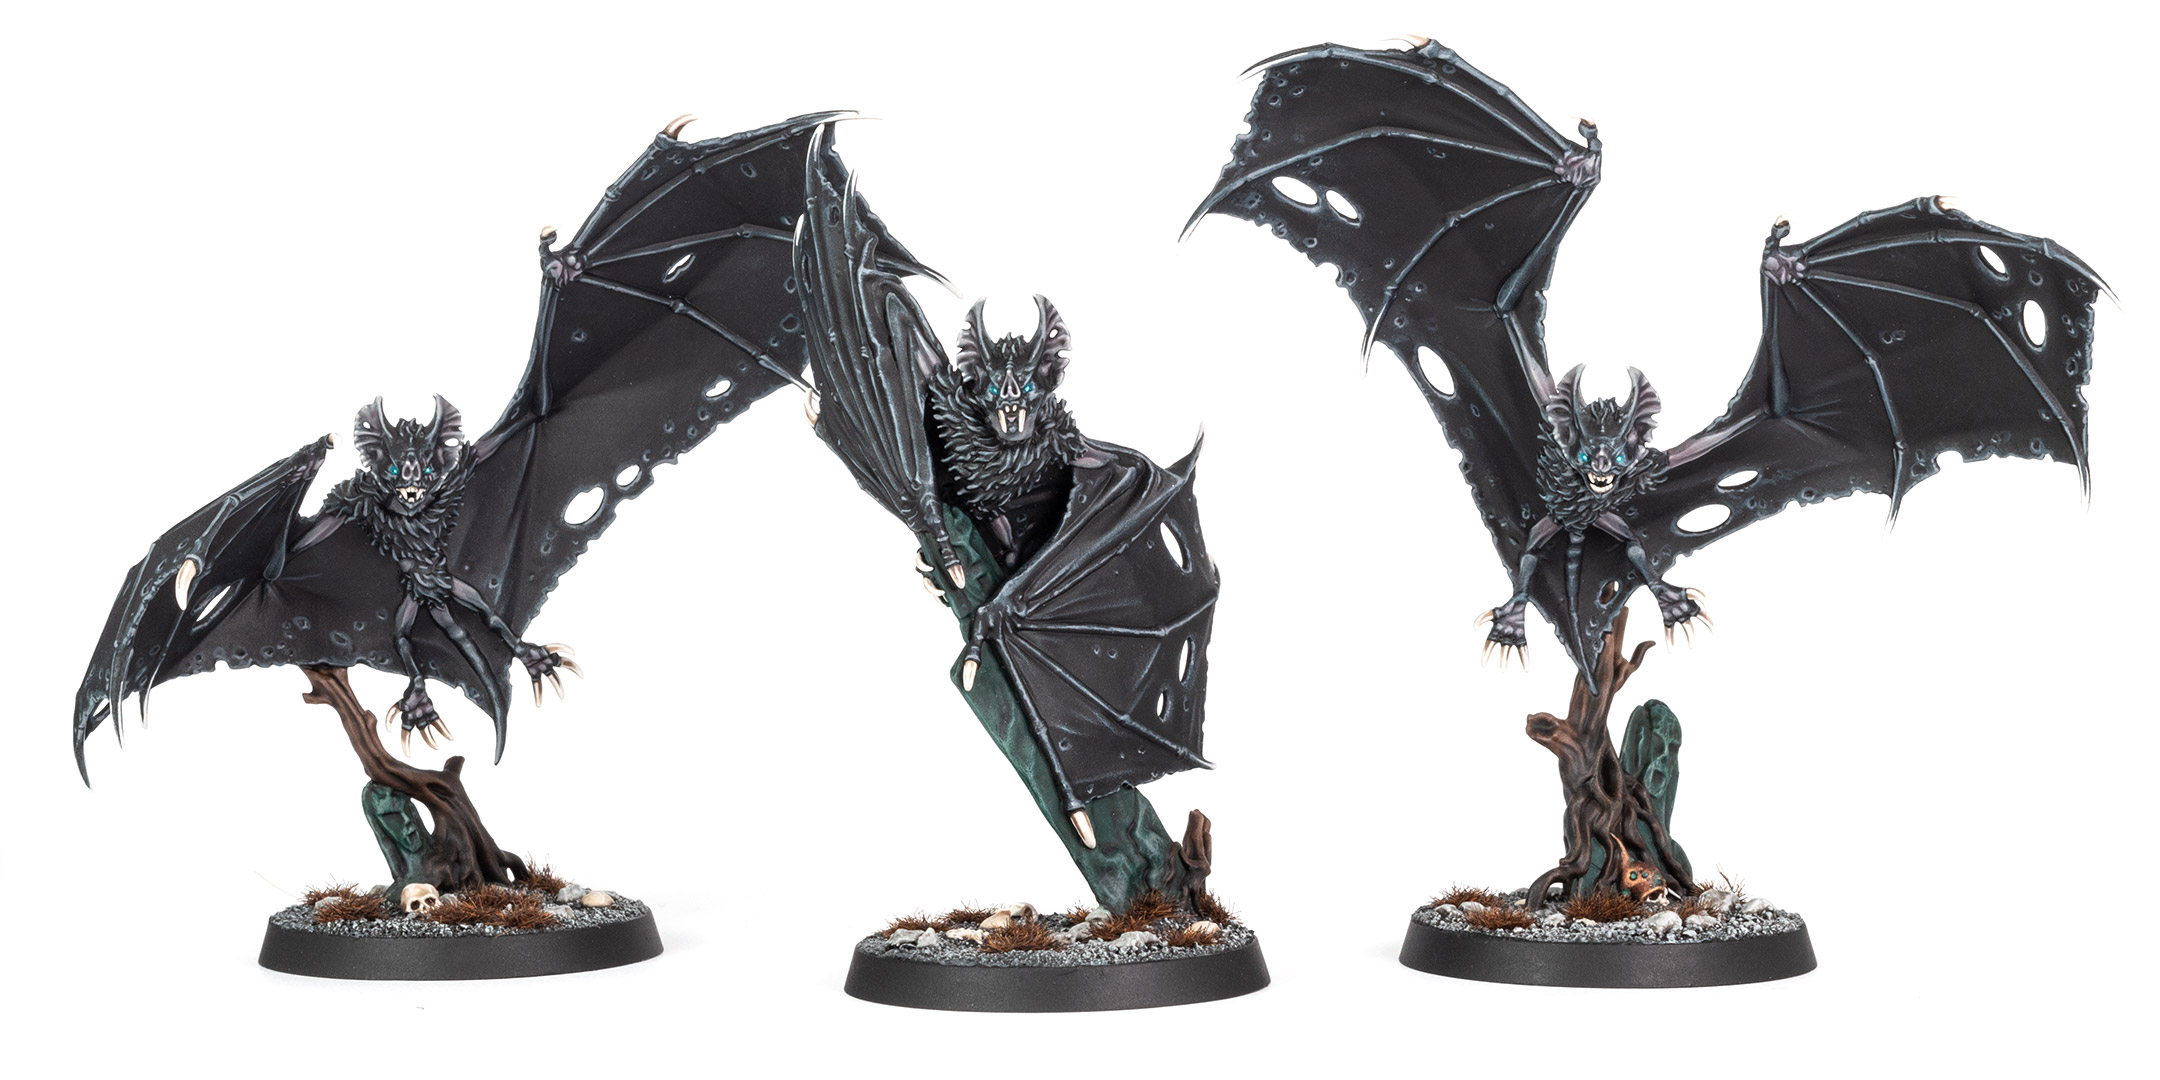 Three Soulblight Gravelords Fell Bats from Warhammer Age of Sigmar, painted by Stahly